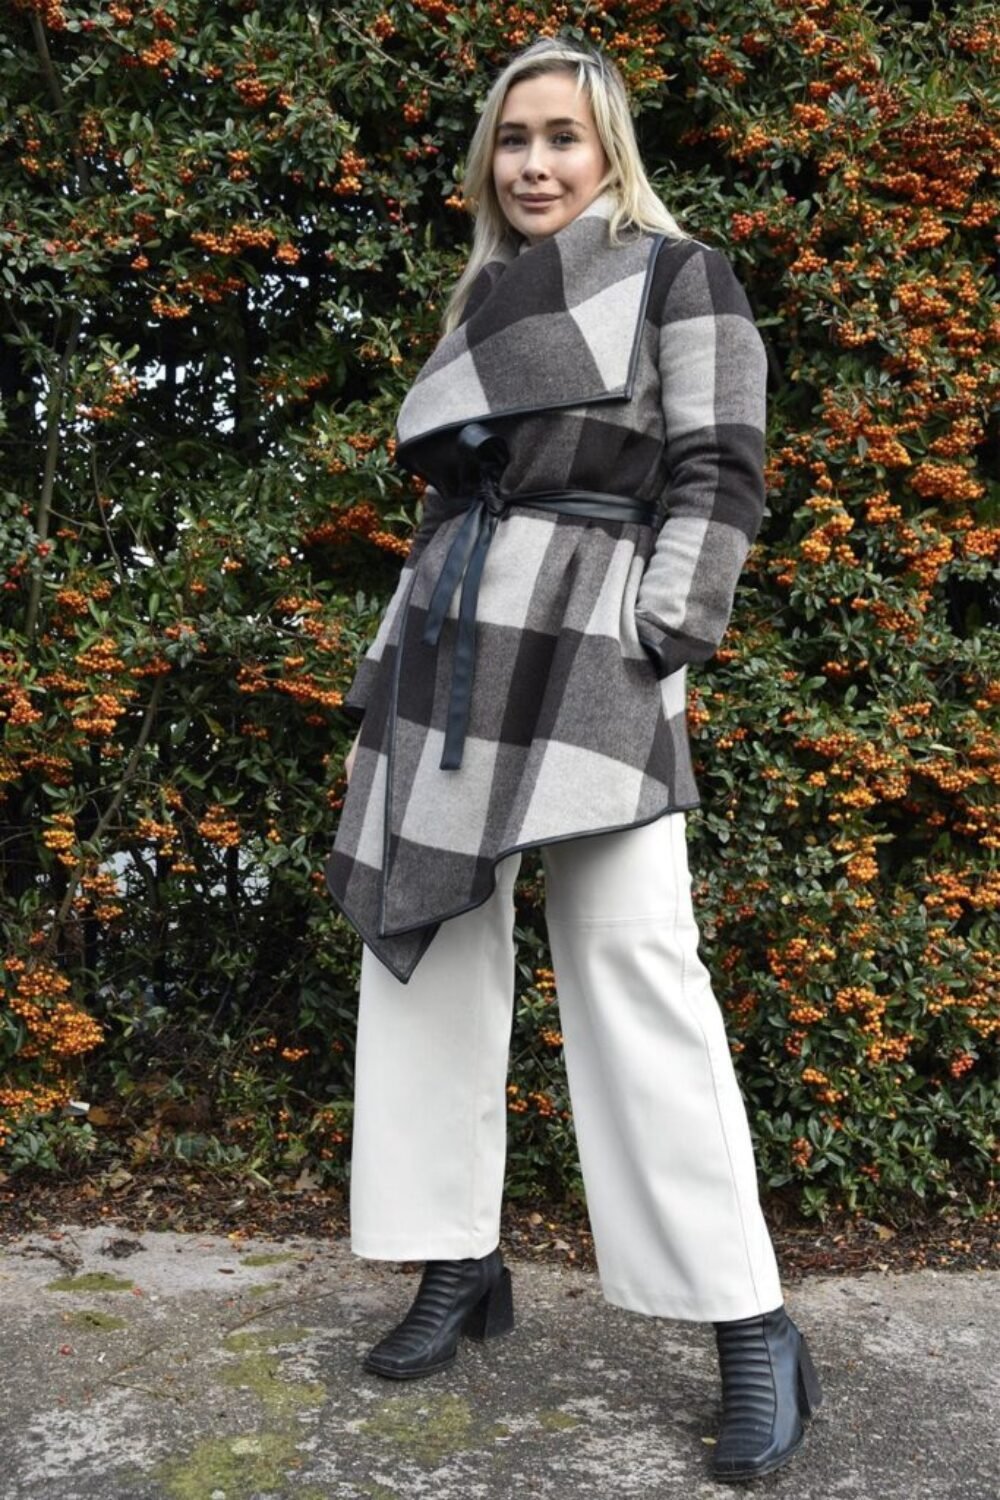 Shop Lux Cashmere Blend Check Coat and women's luxury and designer clothes at www.lux-apparel.co.uk